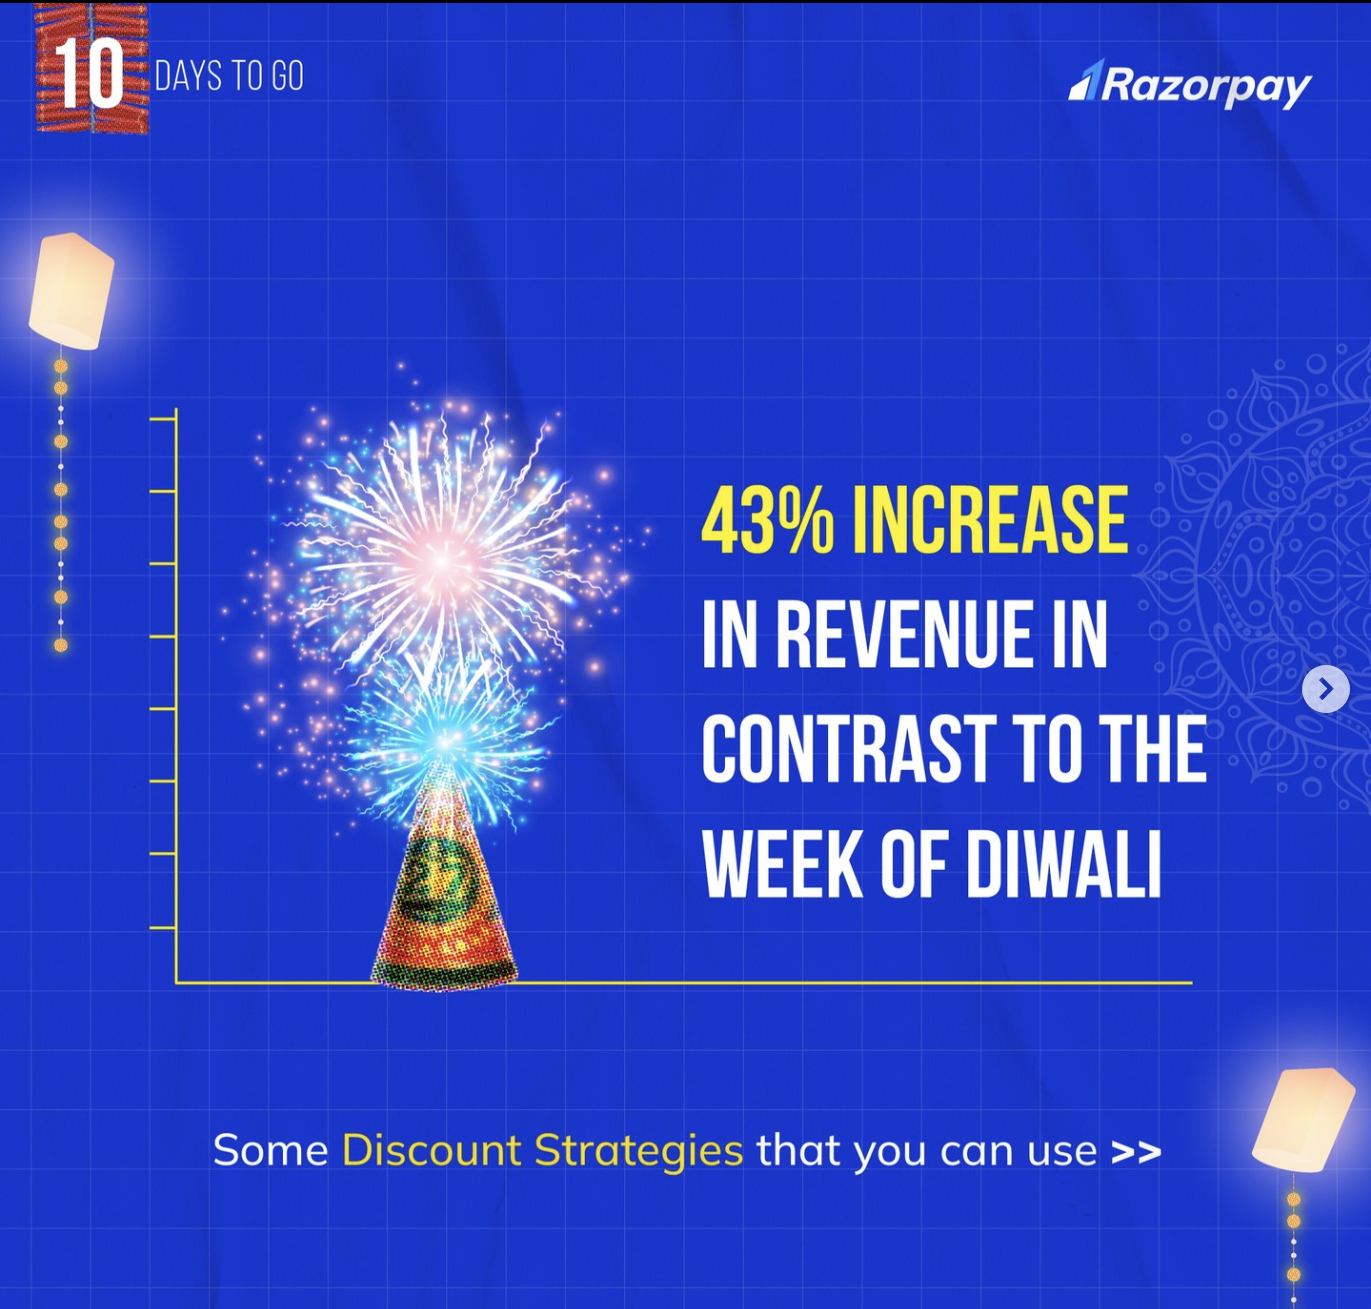 India witnesses the Dhanteras gold rush, Jewelry sees a 595% increase in orders during the Diwali season: Razorpay Festive Report